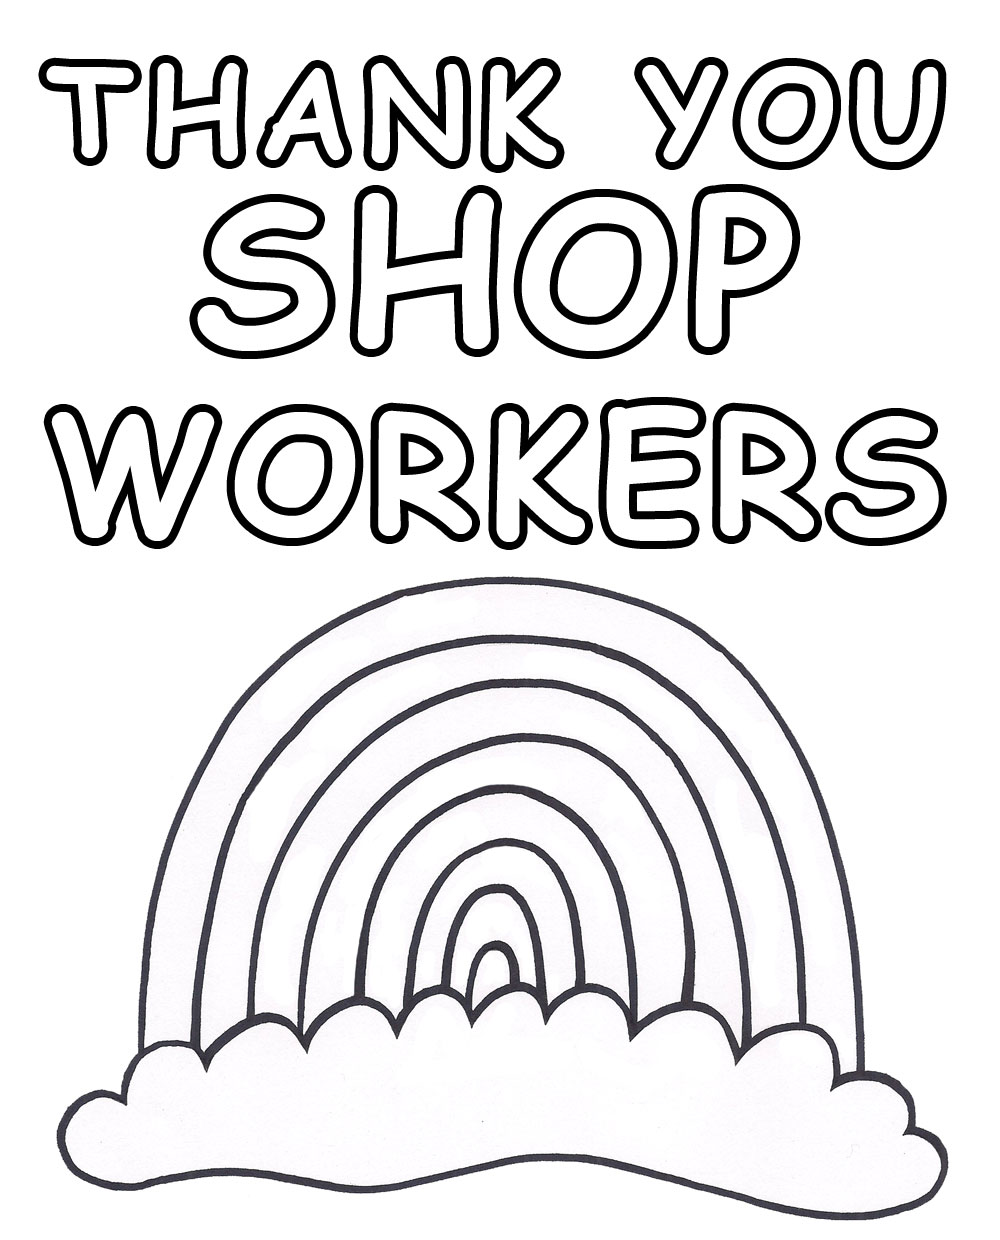 A printable rainbow poster for kids to colour in to say thank you to shop workers